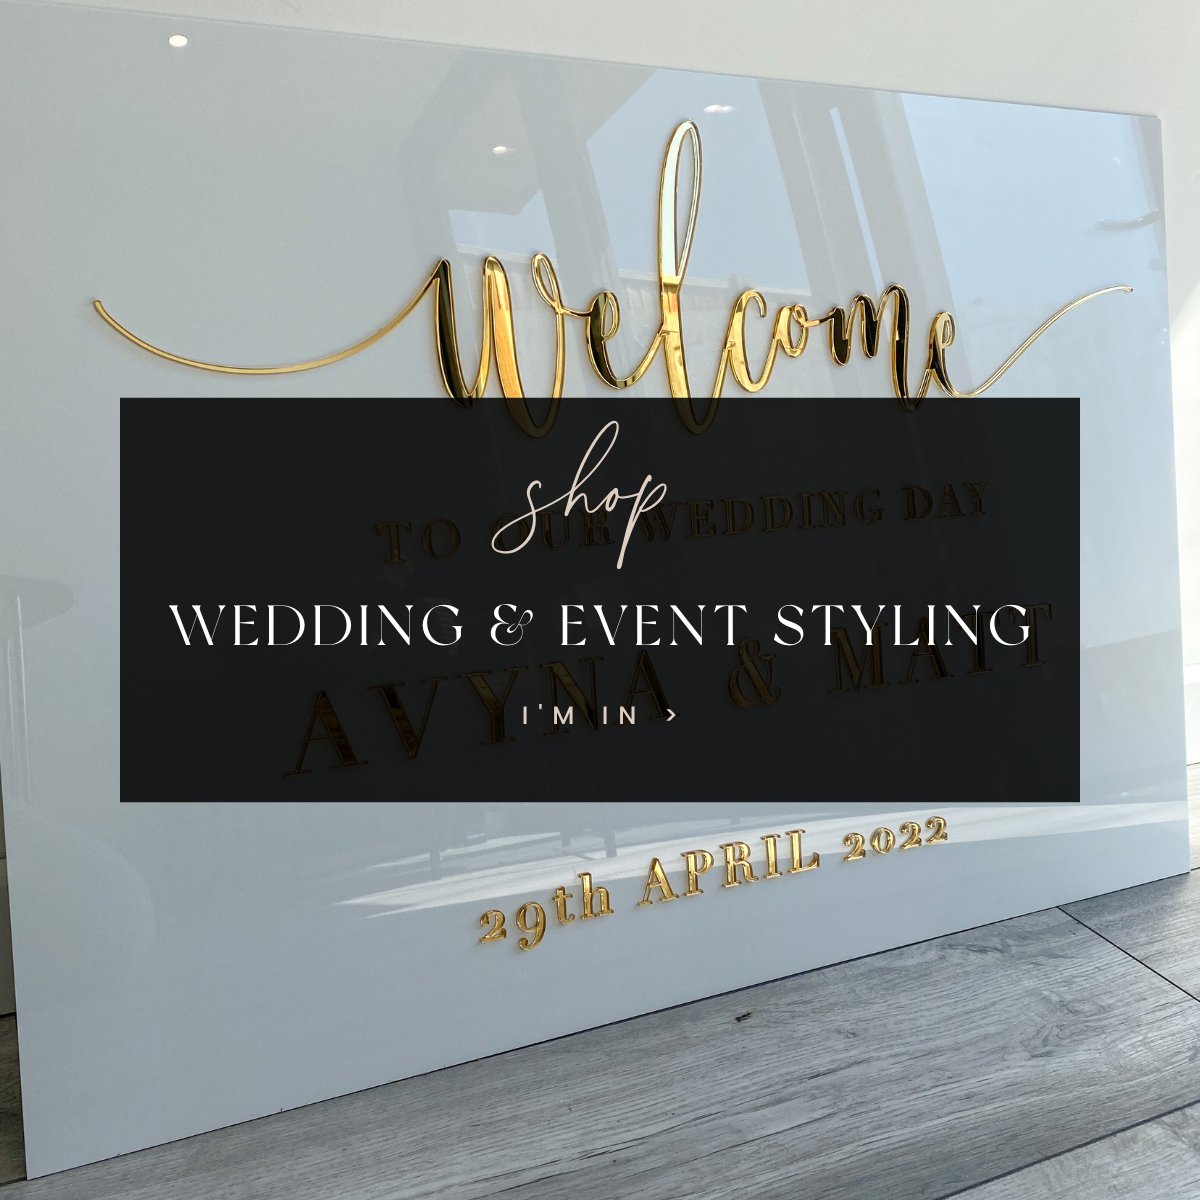 WEDDING AND EVENT STYLING